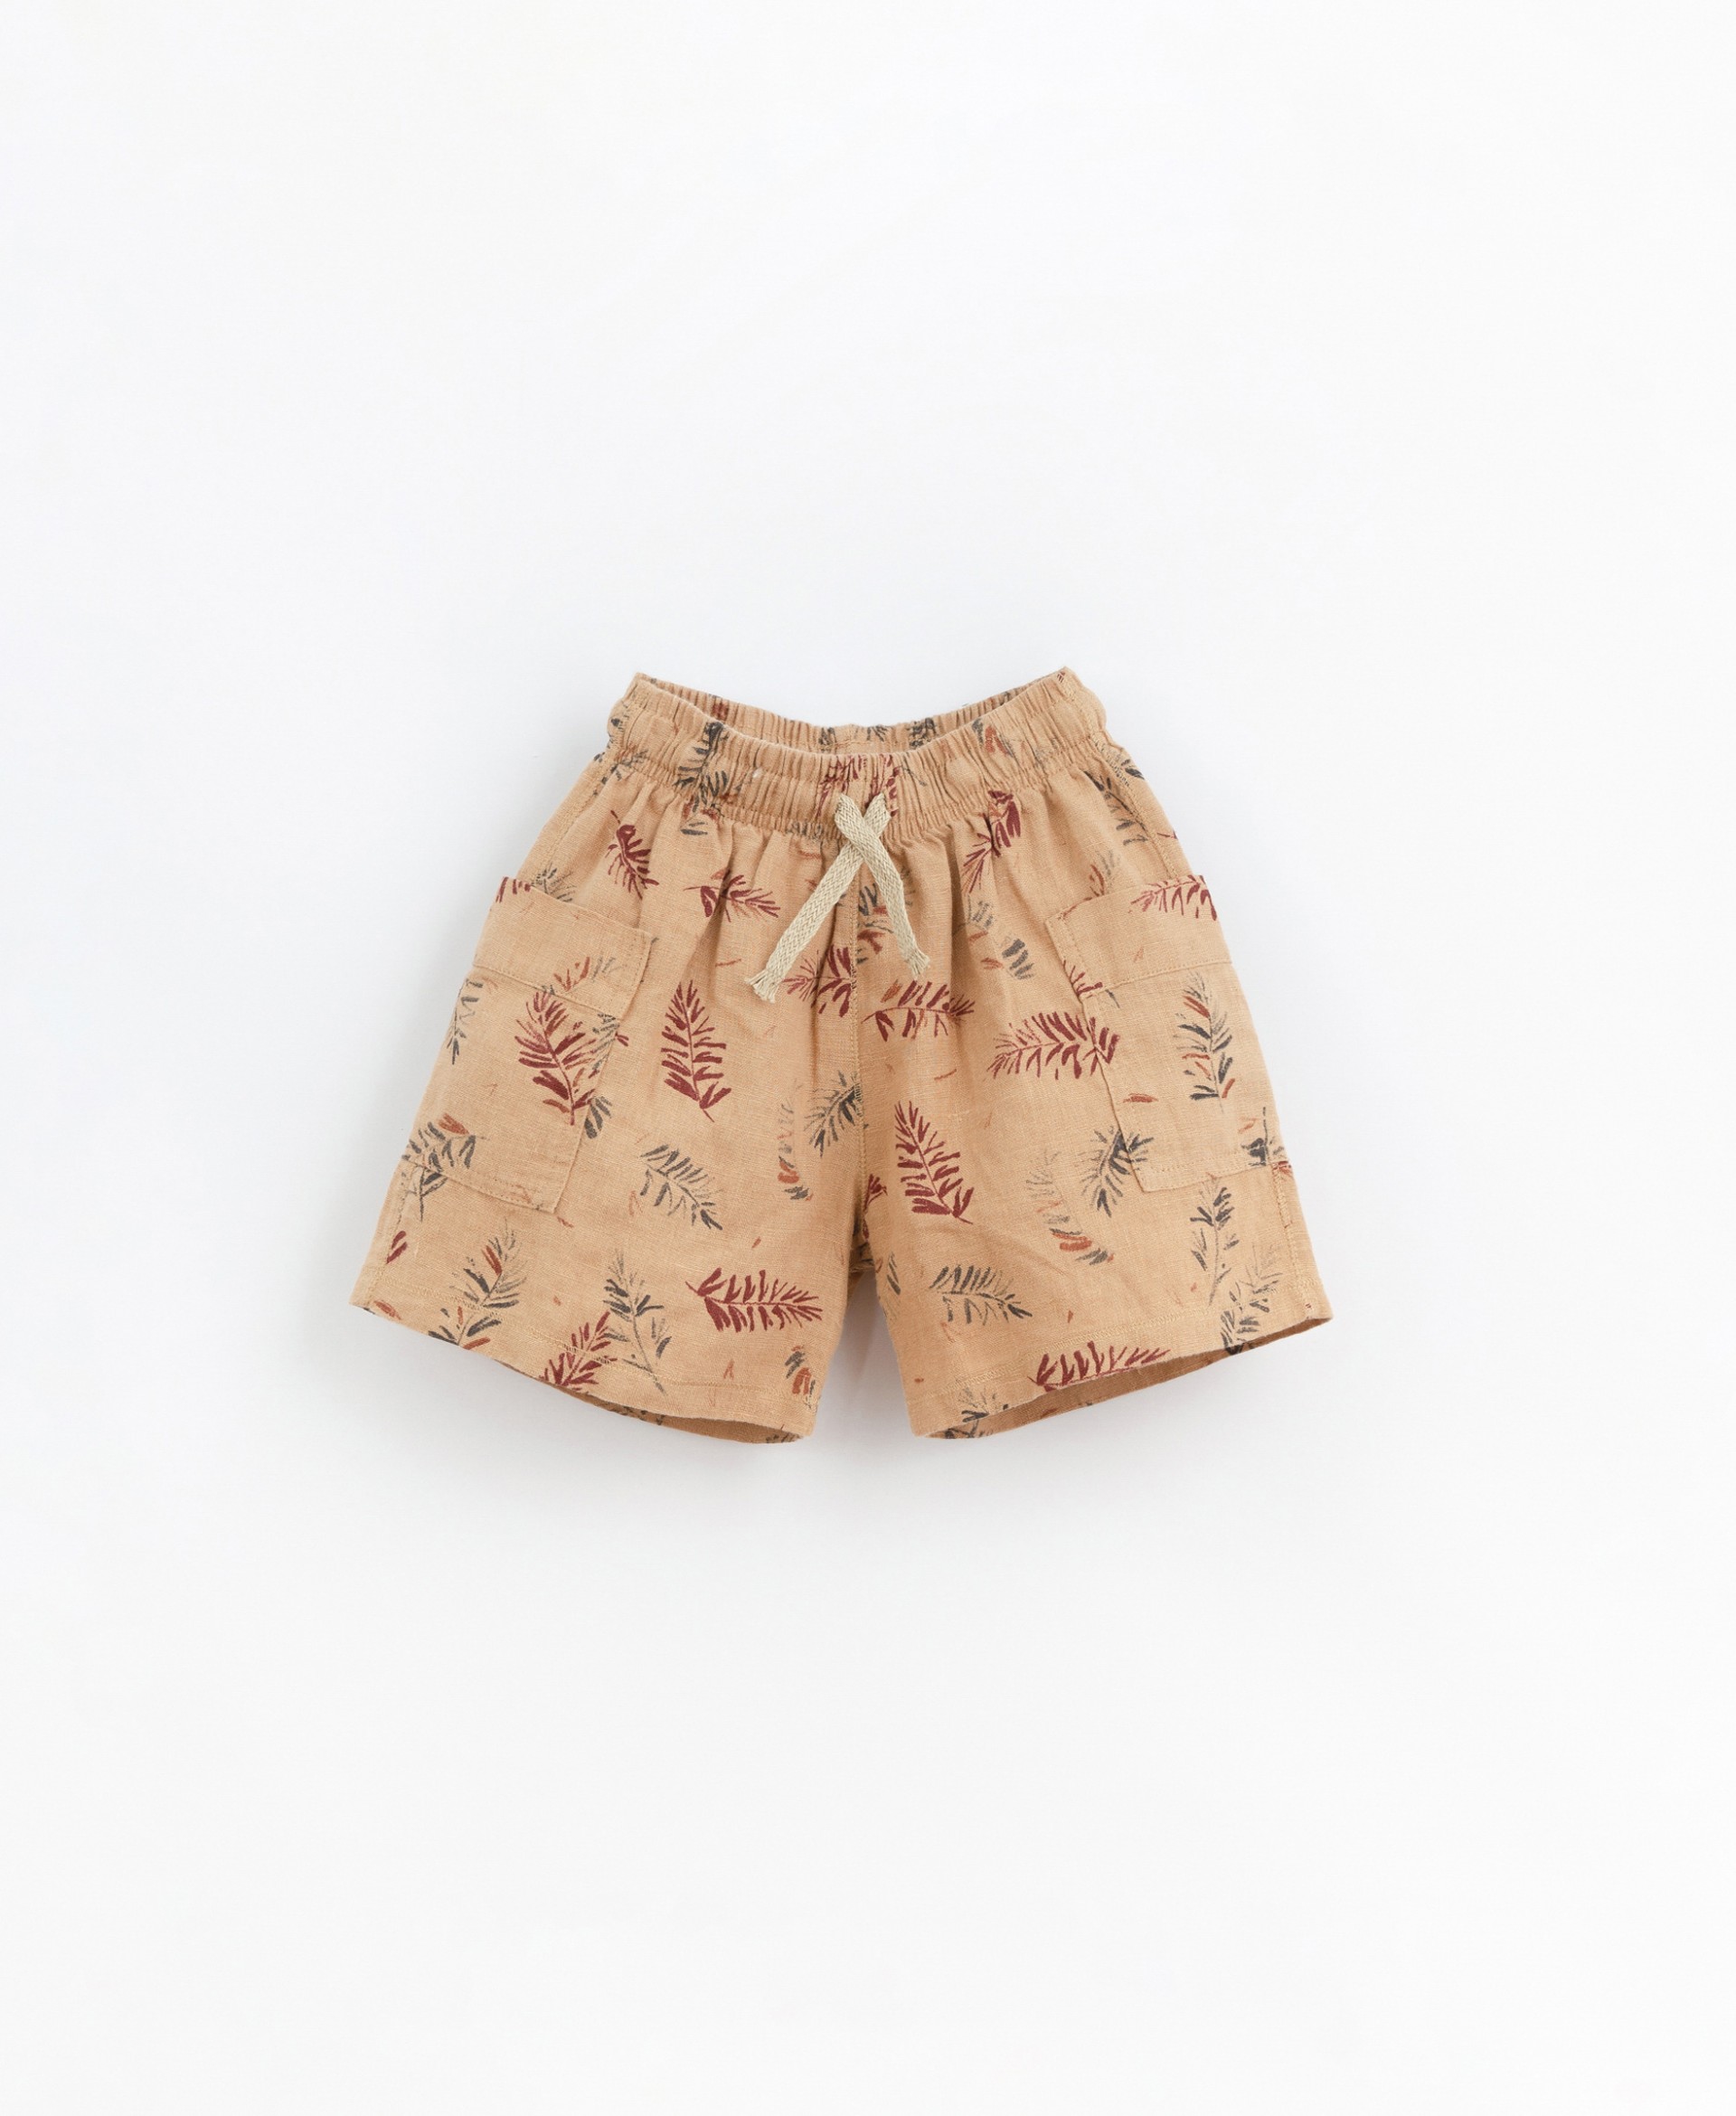 Shorts in fir tree print | Basketry